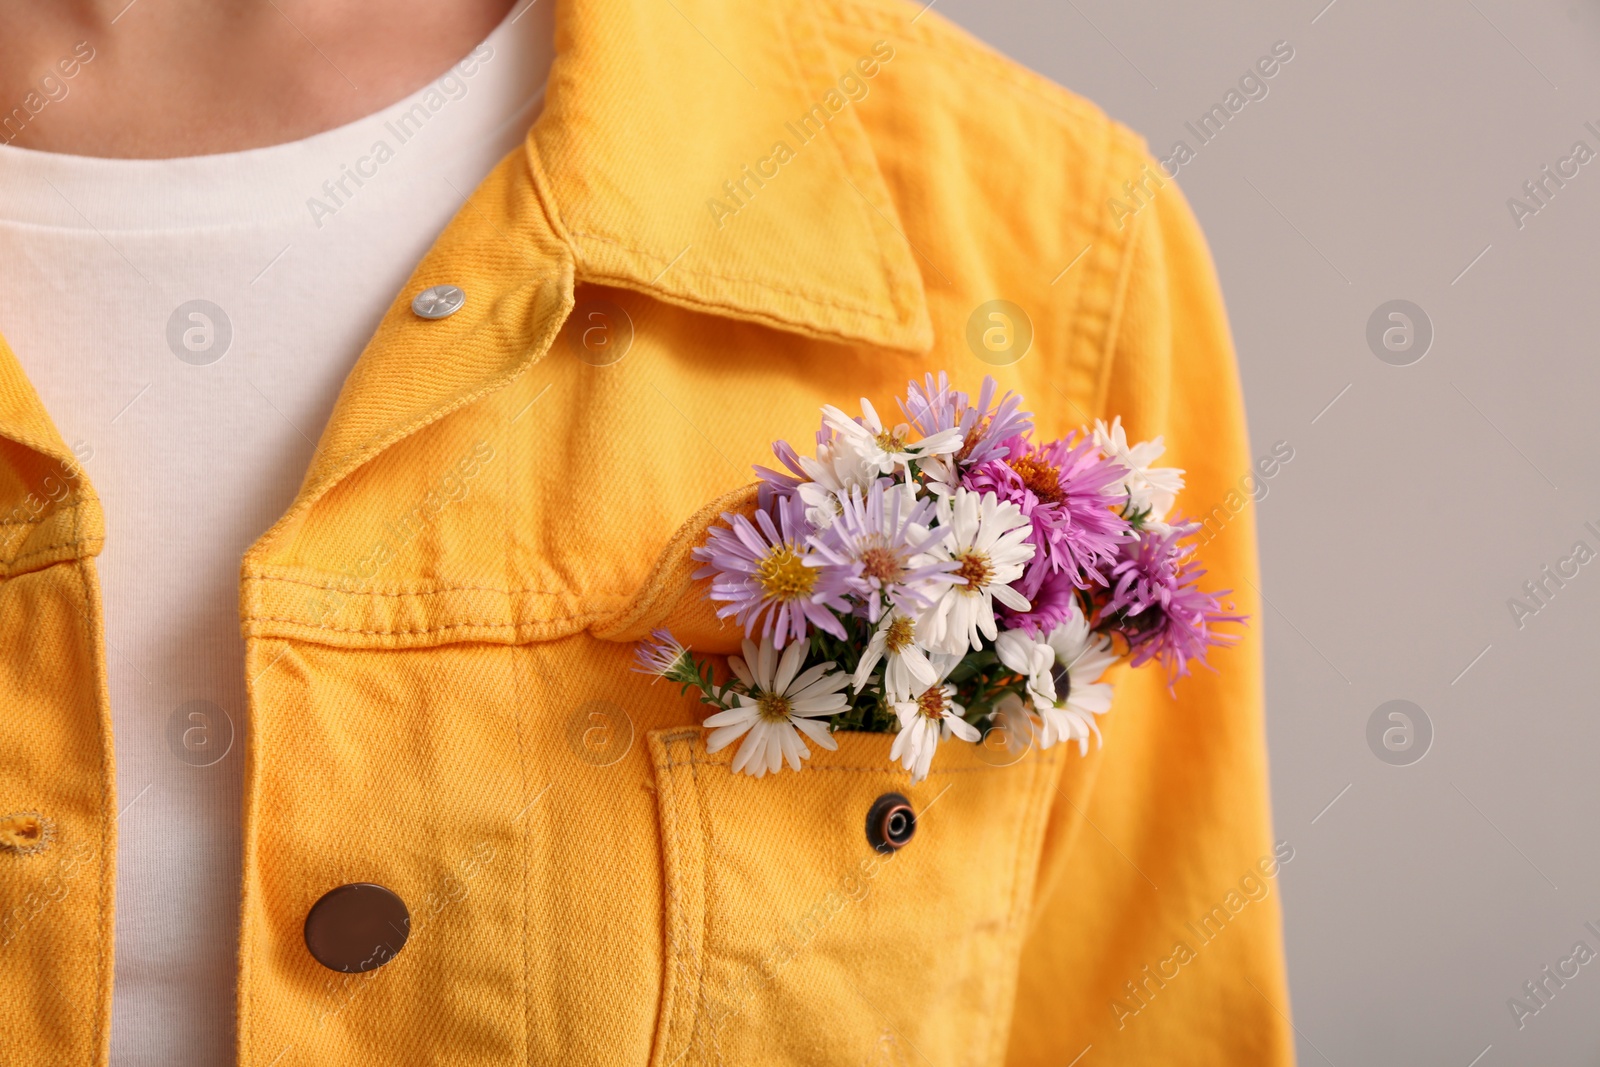 Photo of Woman with beautiful tender flowers in jacket's pocket on light background, closeup